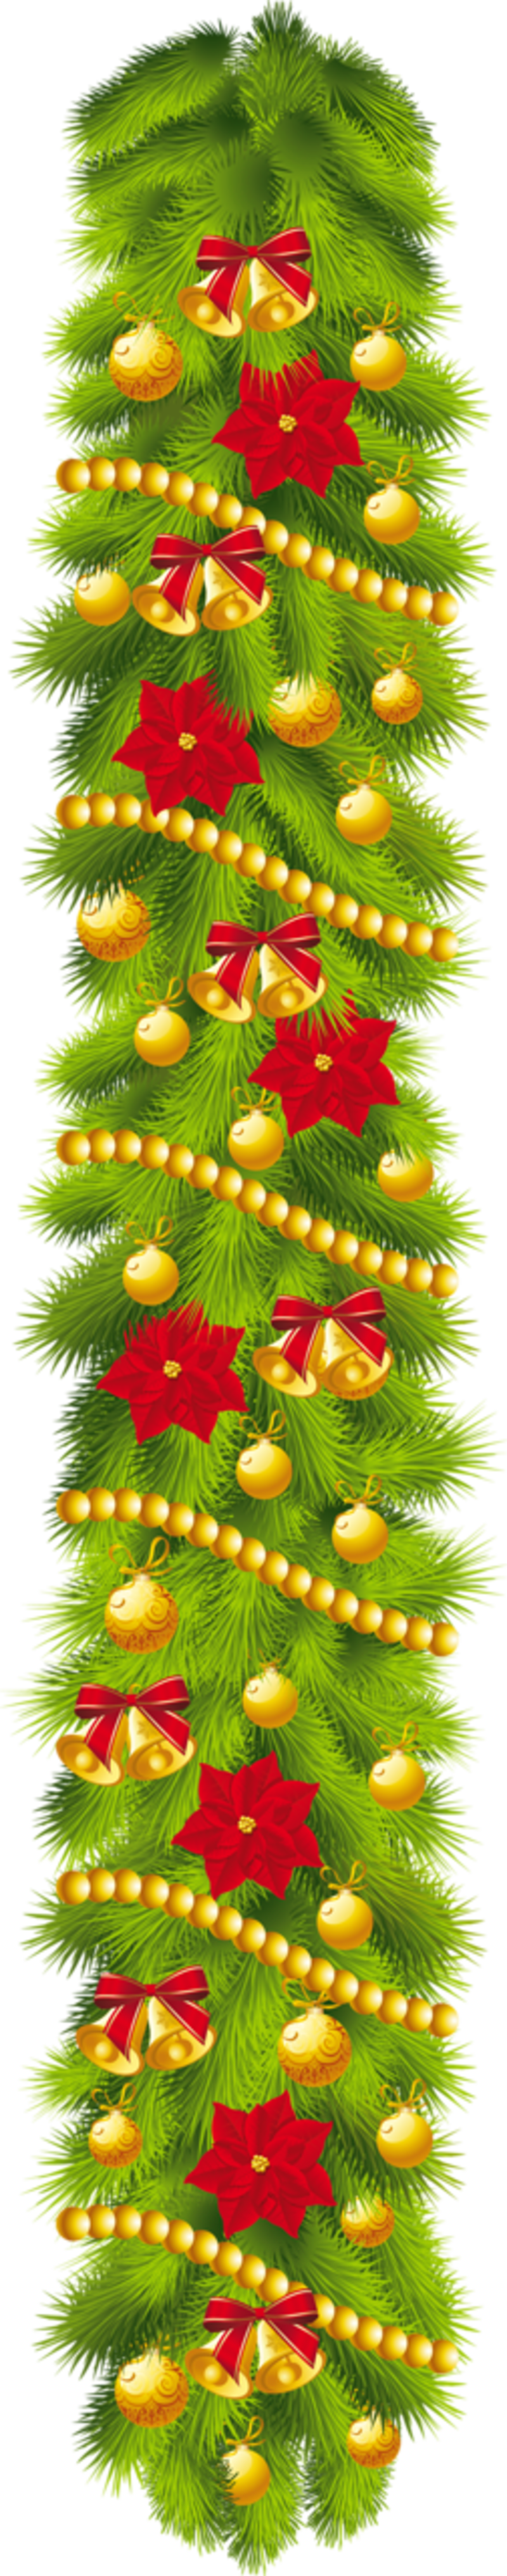 Transparent_Christmas_Pine_Garland_with_Ornaments_Clipart.png